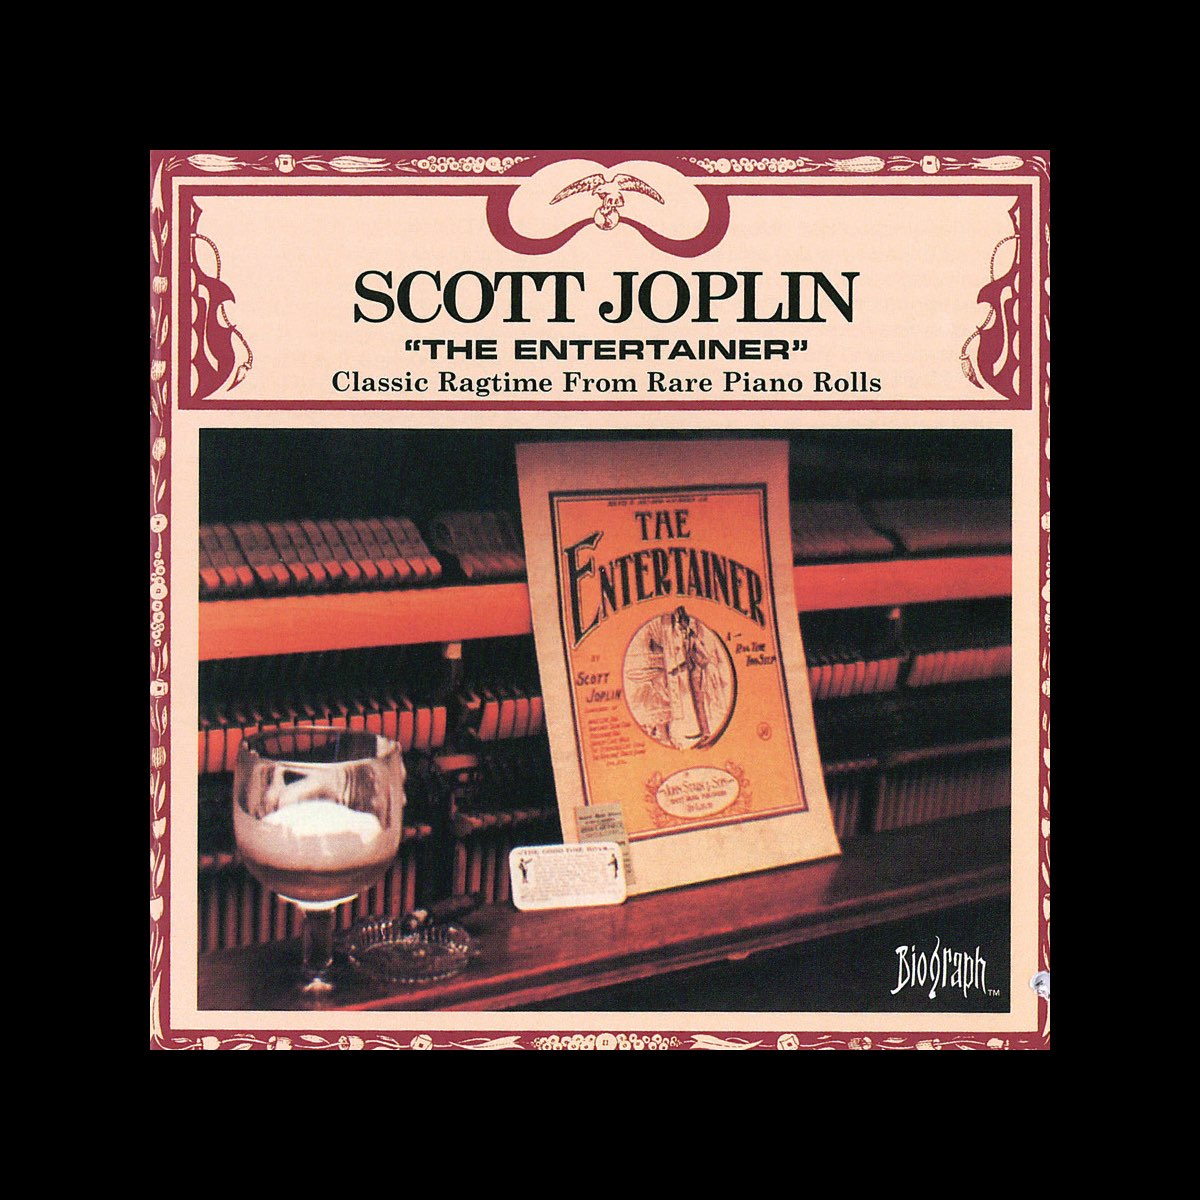 The Entertainer - Classic Ragtime from Rare Piano Rolls by Scott Joplin on  Apple Music